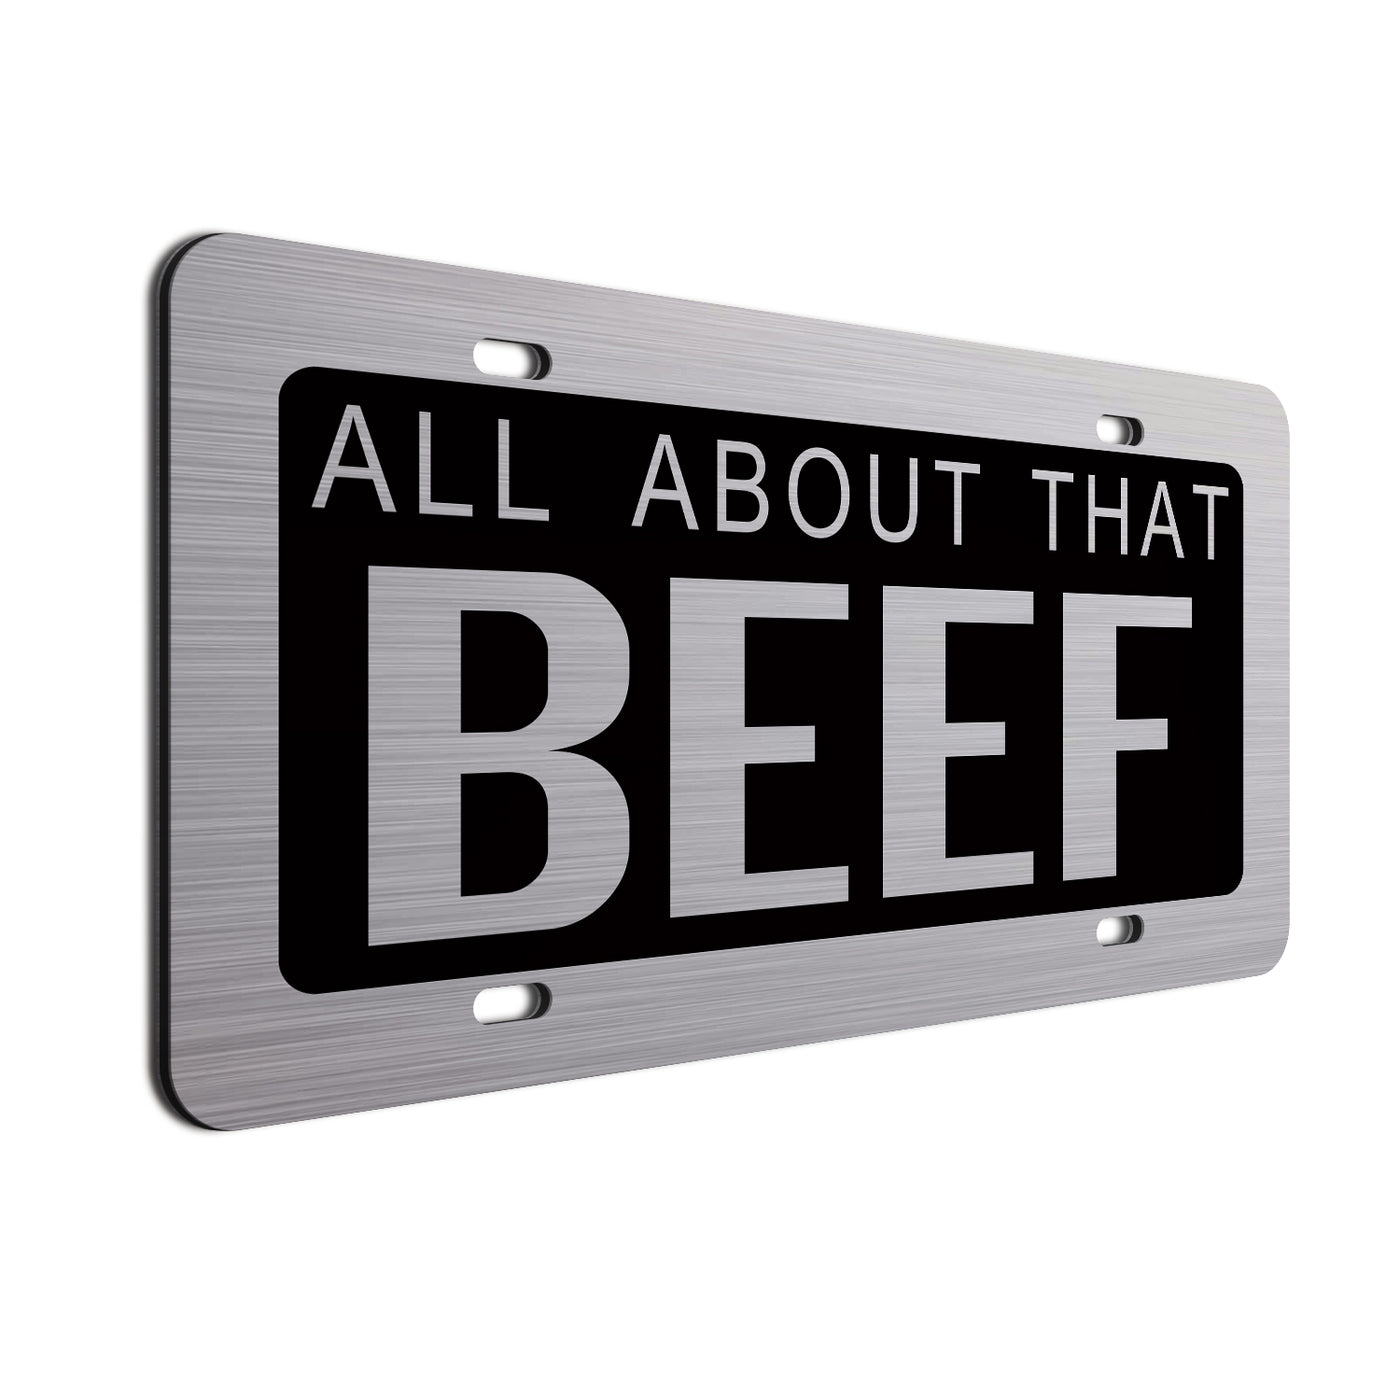  All About That Beef Car License Plate Black